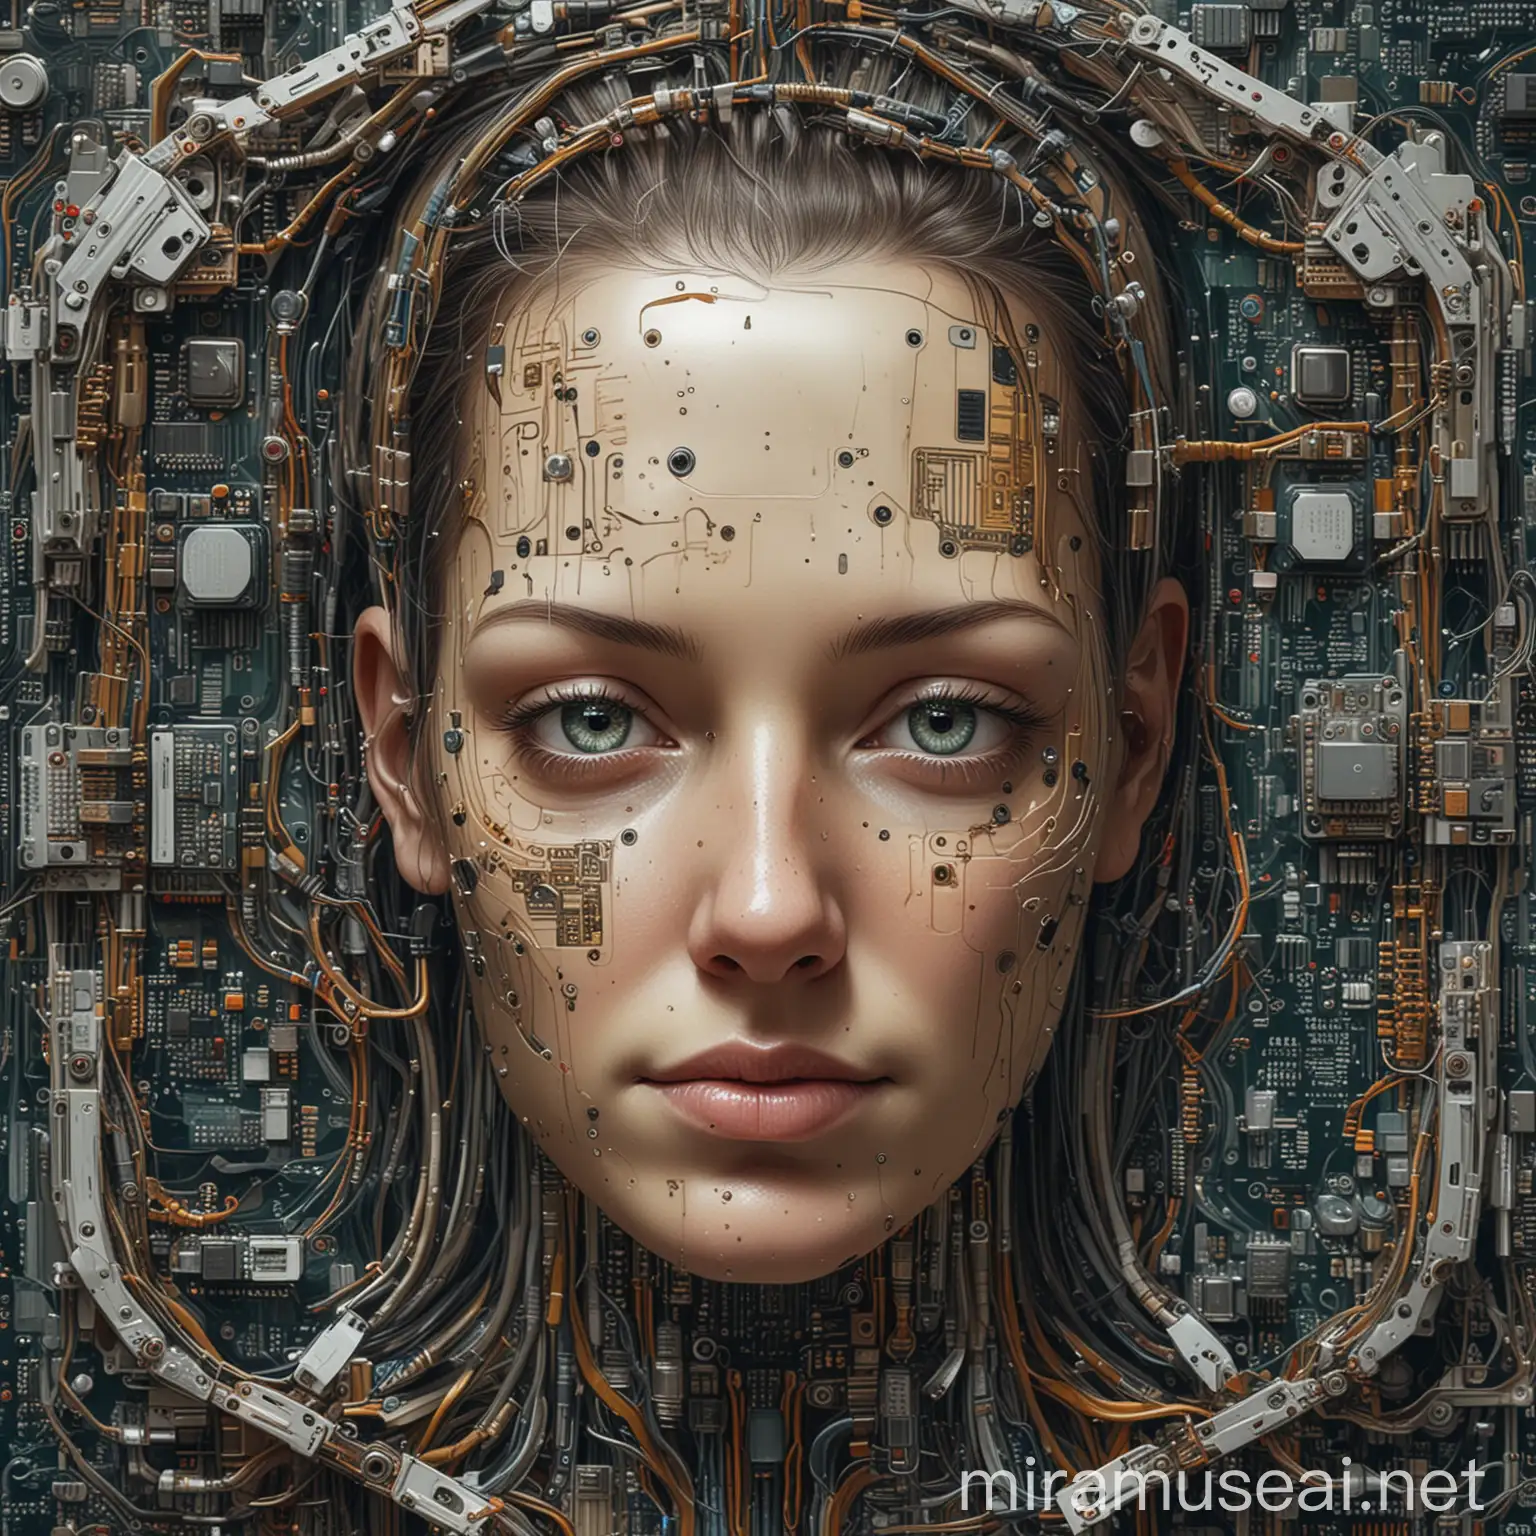 Detailed Android with HalfPeeled Human Face Revealing Circuitry